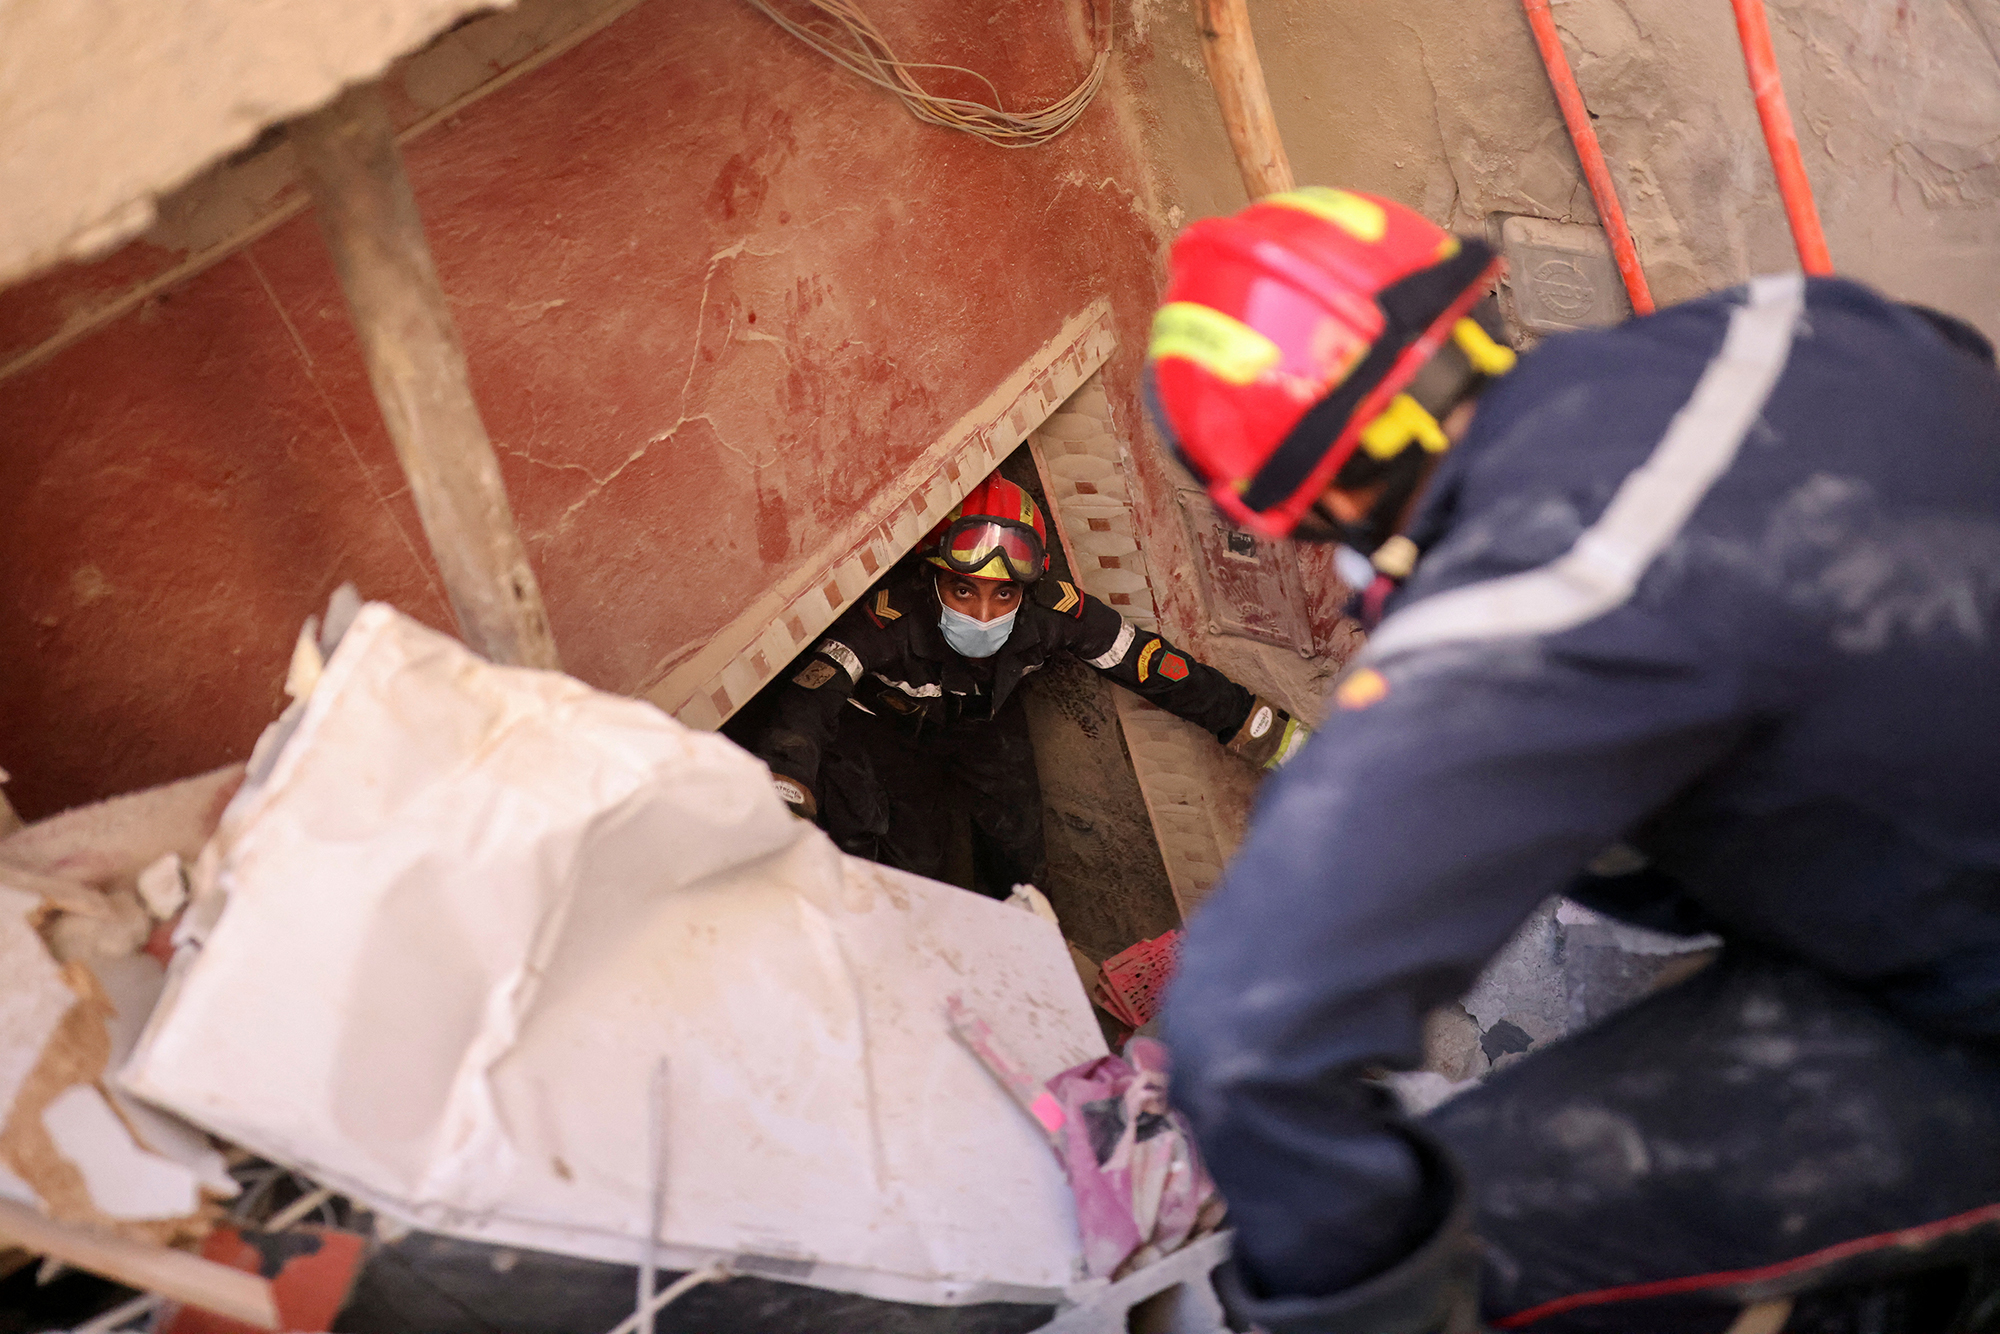 Emergency workers attempt to remove a body from inside a damaged home in Amizmiz, Morocco on September 10. 